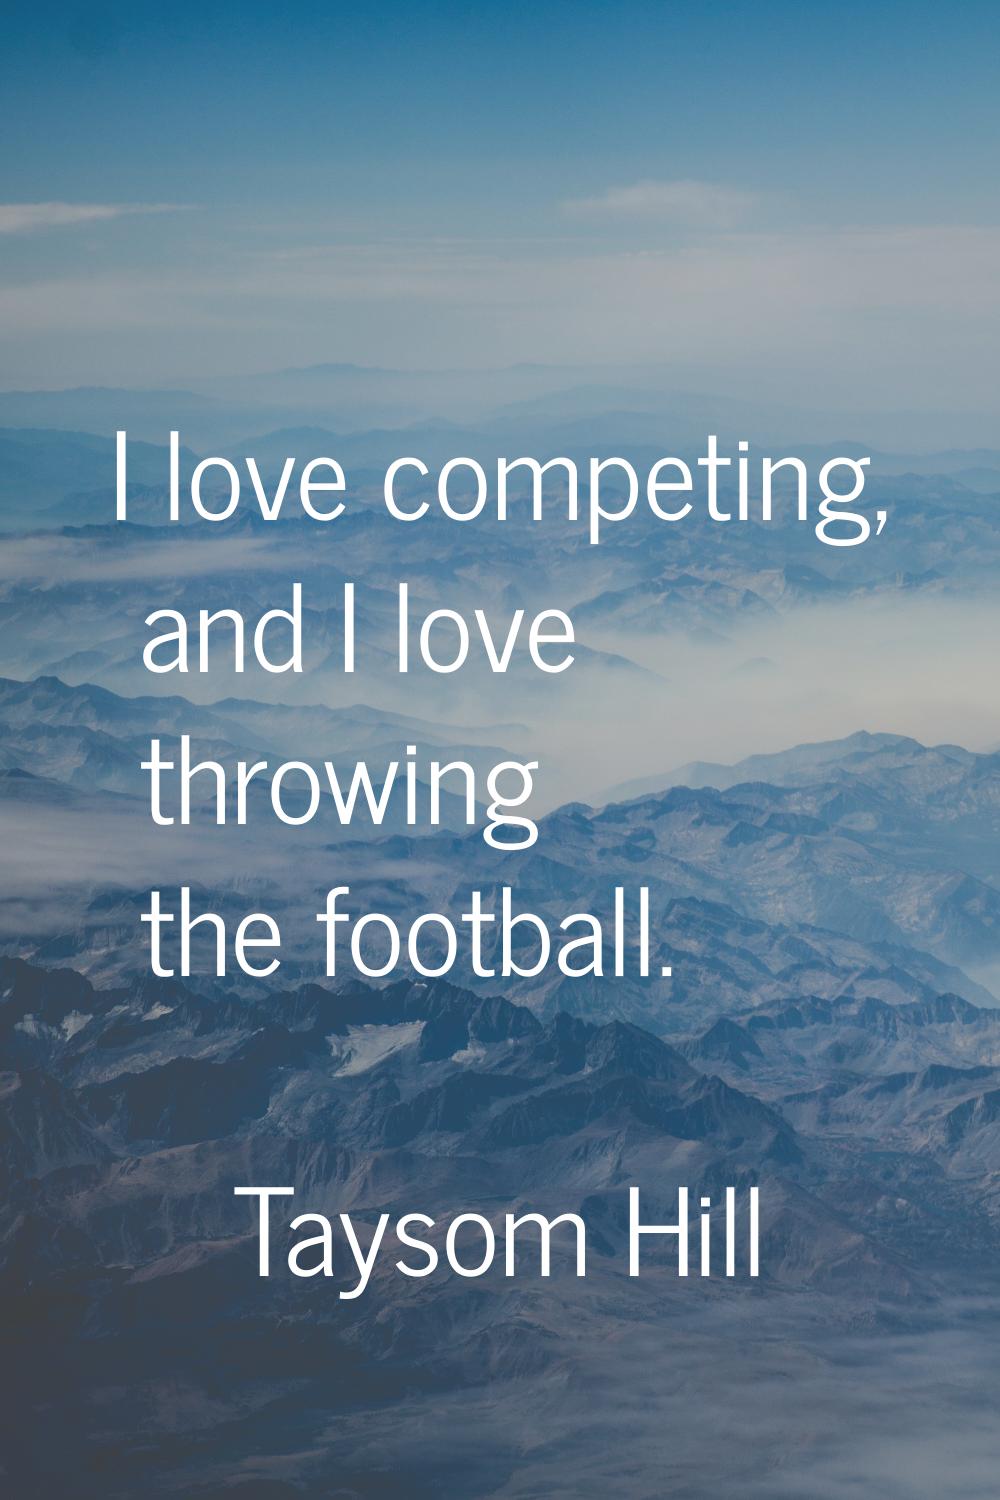 I love competing, and I love throwing the football.